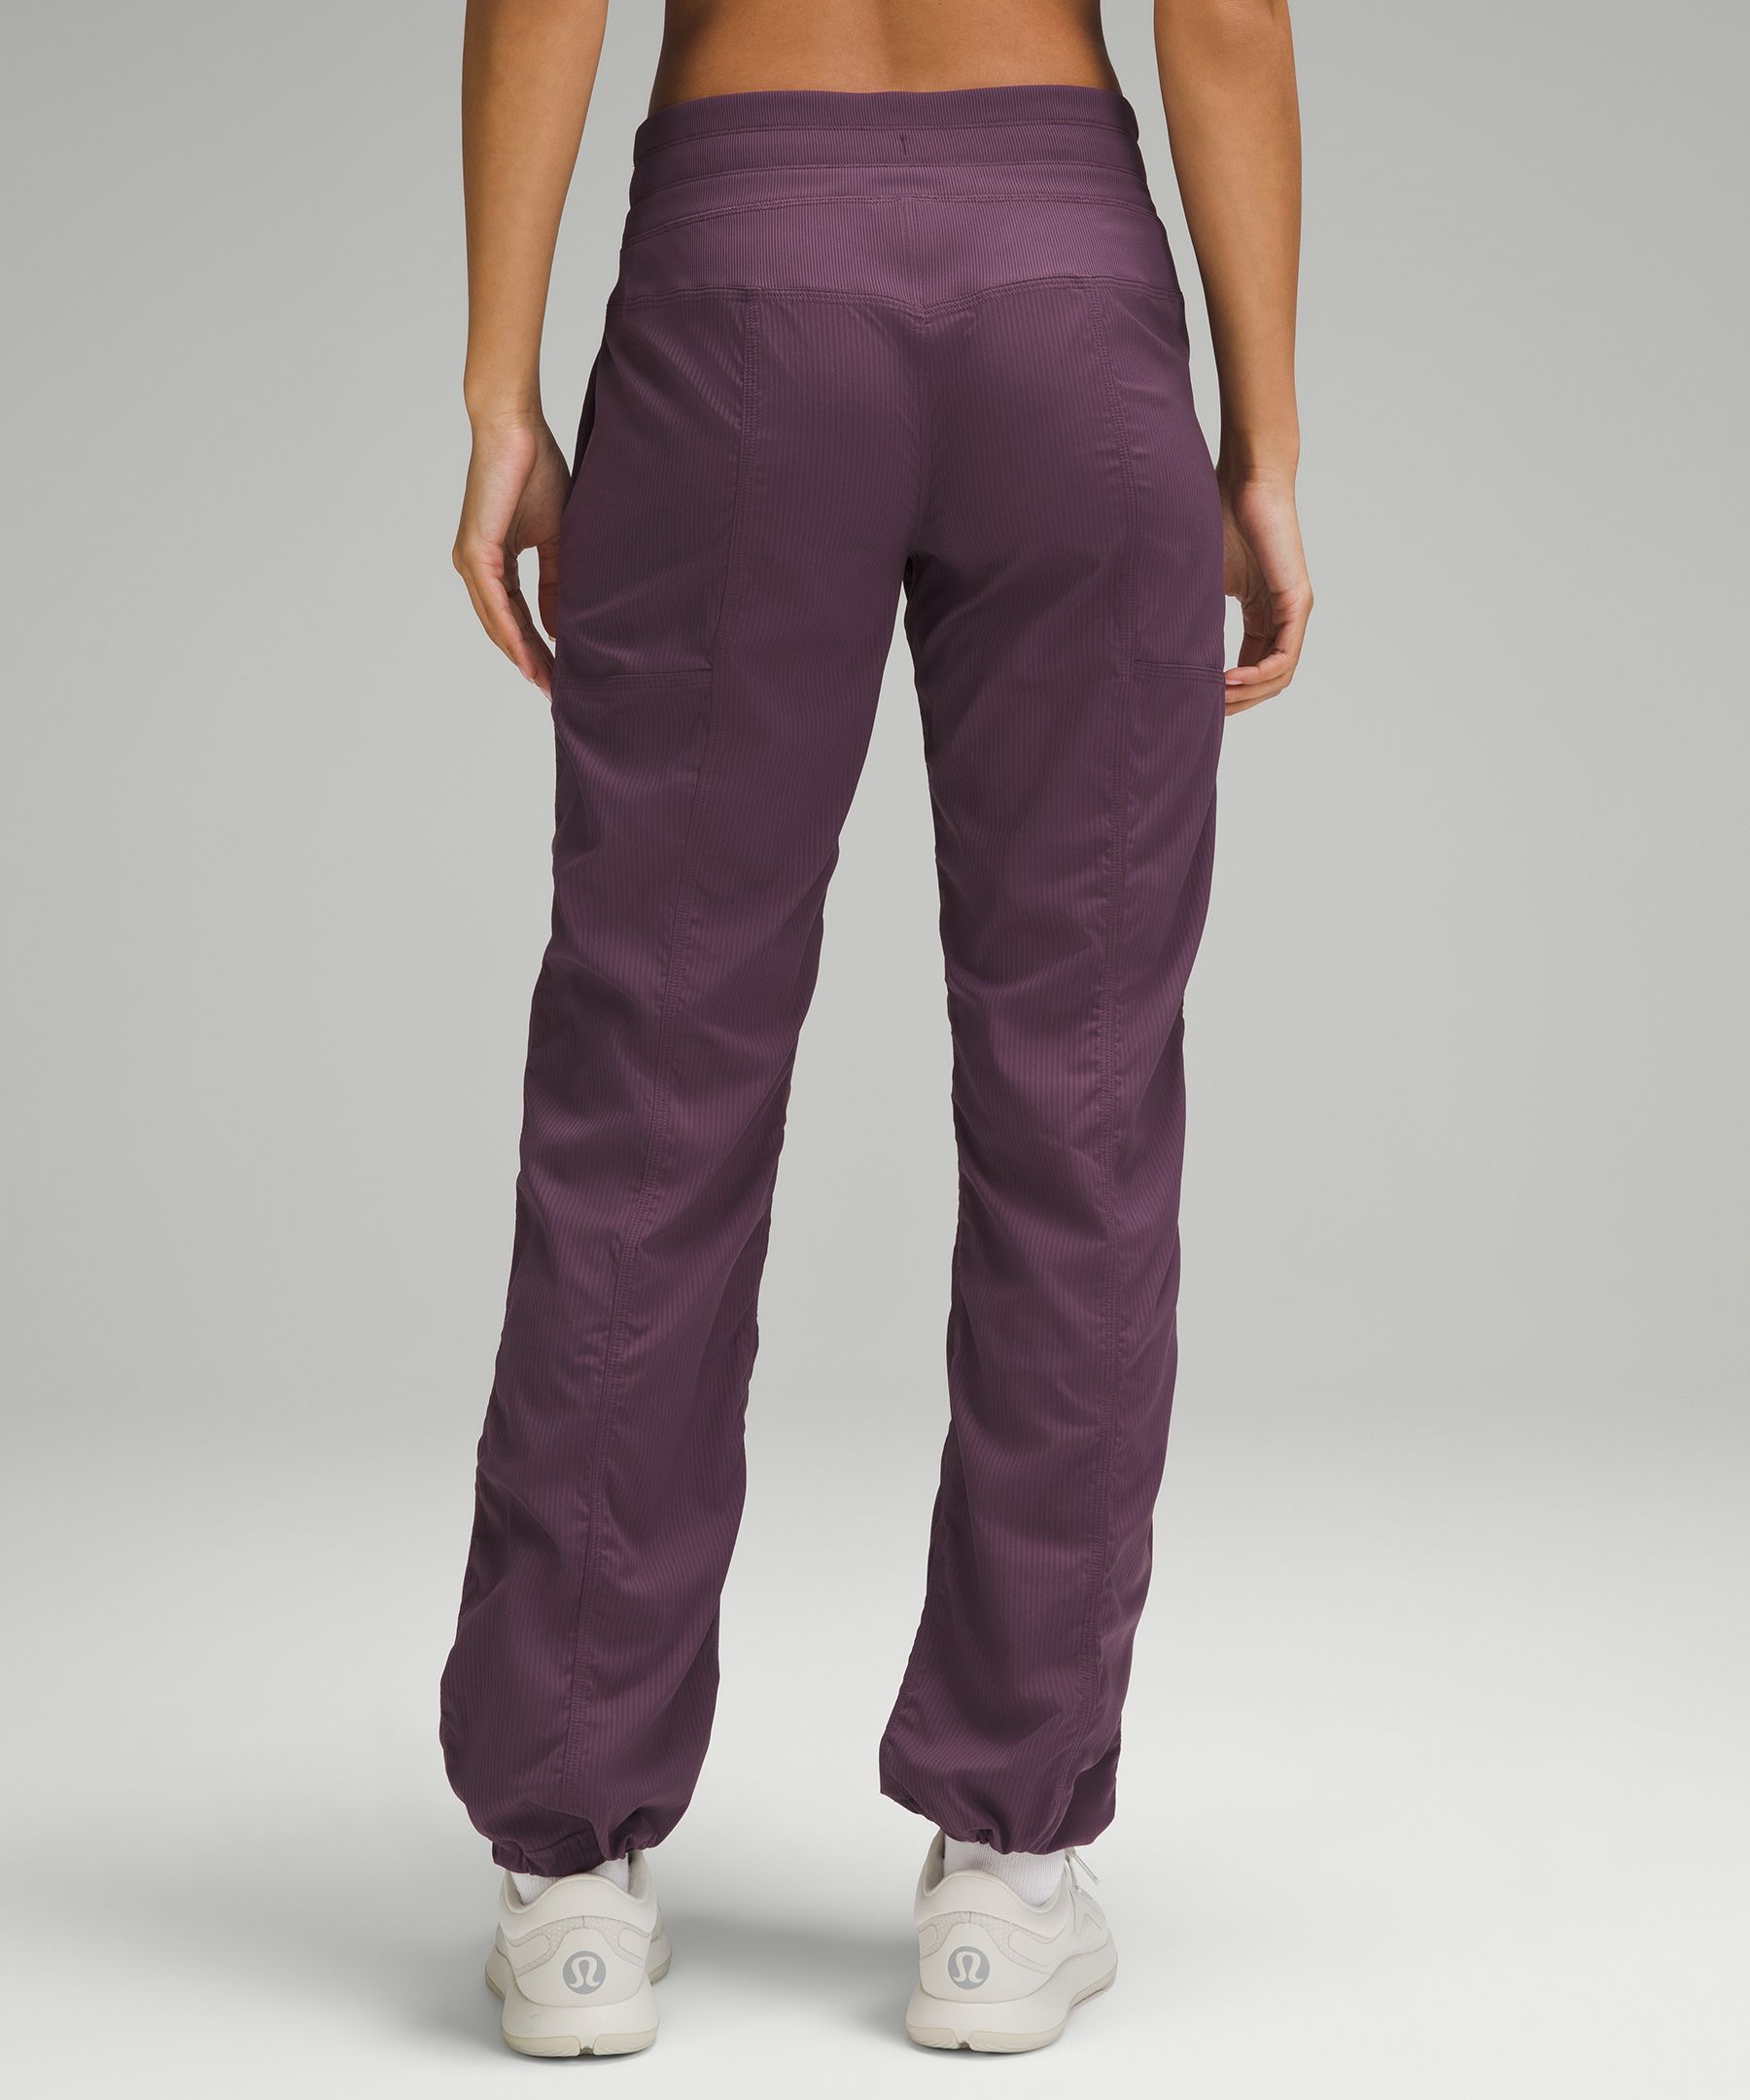 lululemon - The ultimate travel essential. These lightweight, relaxed-leg  pants were designed with a draw cord at the cuff so you can customize the  fit. Meet the Dance Studio Pant